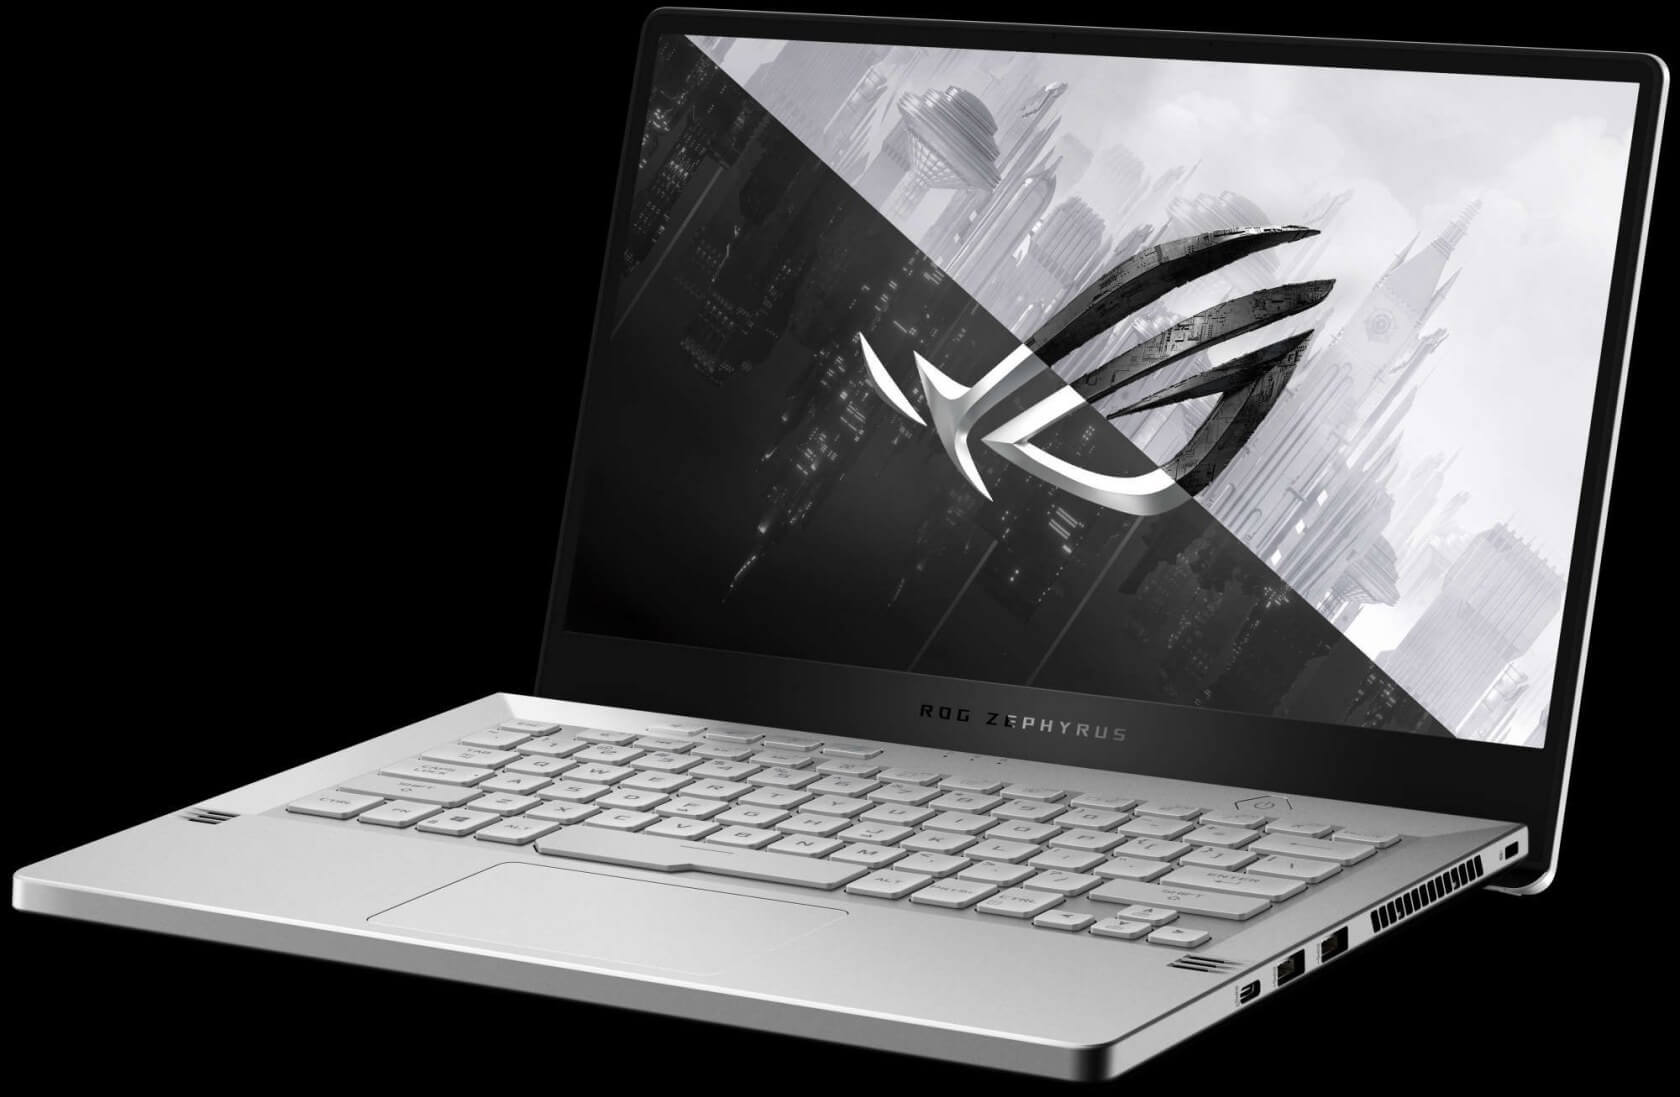 Asus' Zephyrus G14 is a 14-inch gaming laptop with a customizable LED lid and RTX graphics